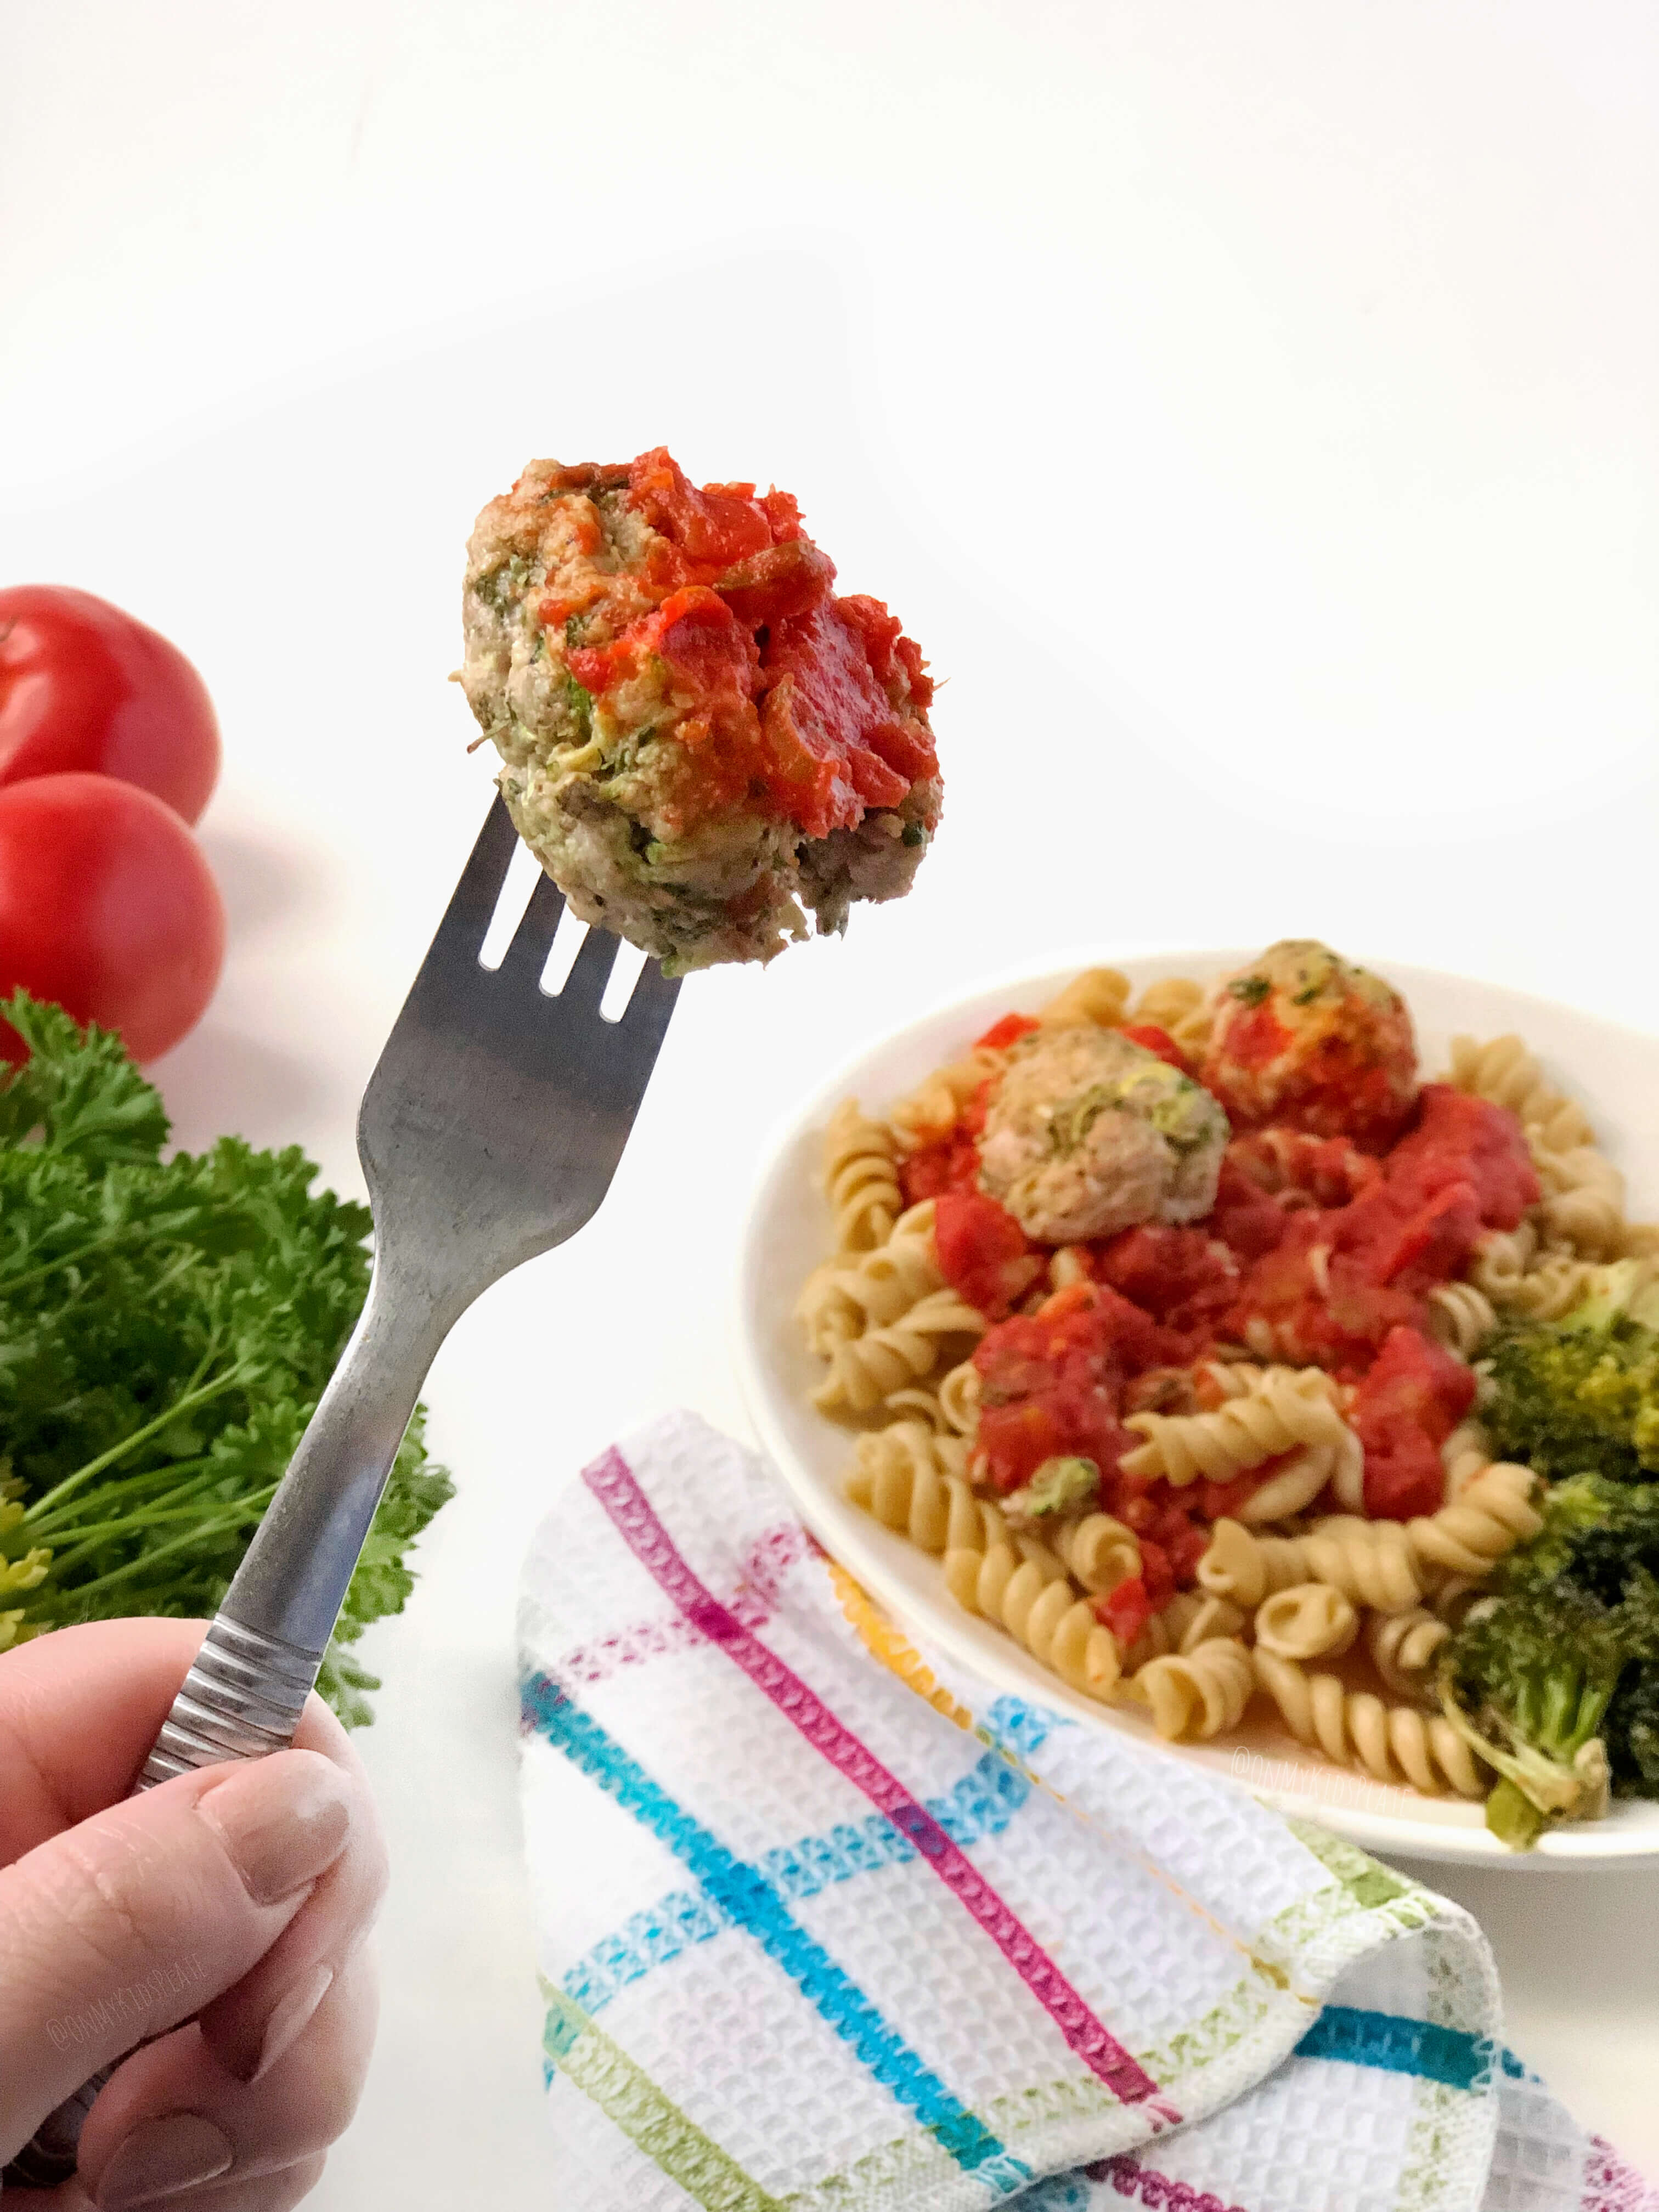 A meatball on a fork, a plate of pasta with meatballs int the background